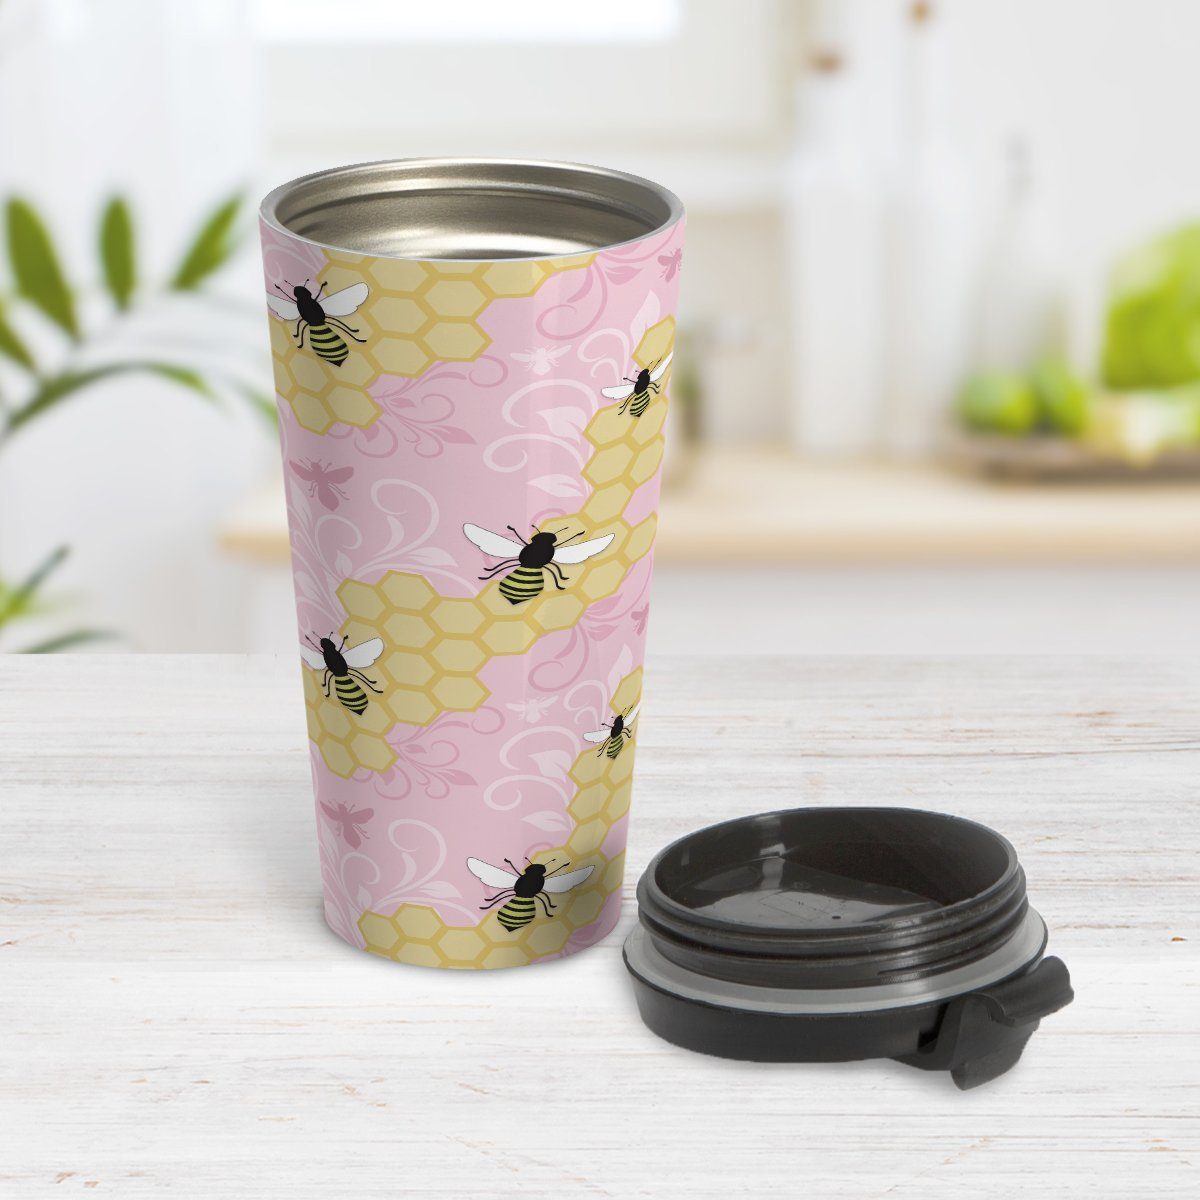 Pink Honeycomb Bee Travel Mug at Amy's Coffee Mugs. A travel mug designed with a pattern of black and yellow bees on honeycomb lines over a pink flourish background that wraps around the tapered shaped mug.